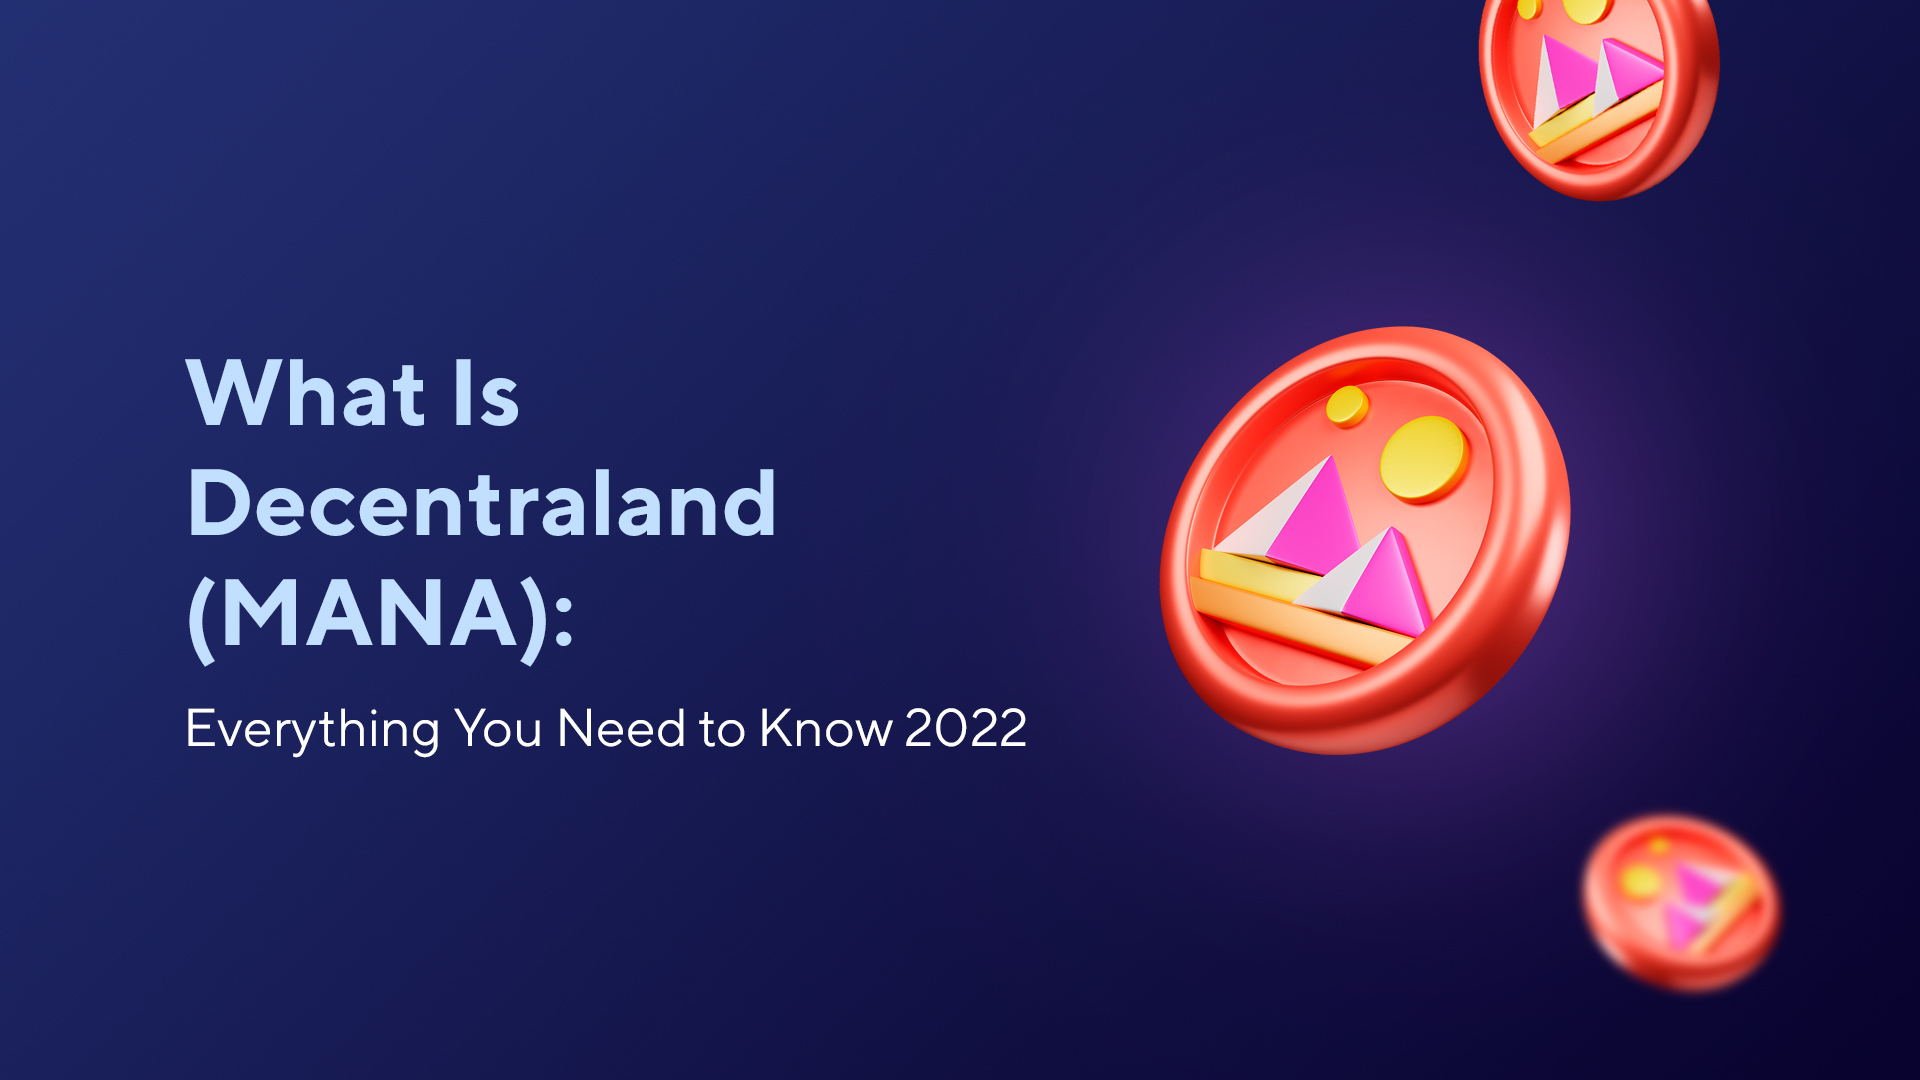 What Is Decentraland (MANA): Everything You Need to Know 2022